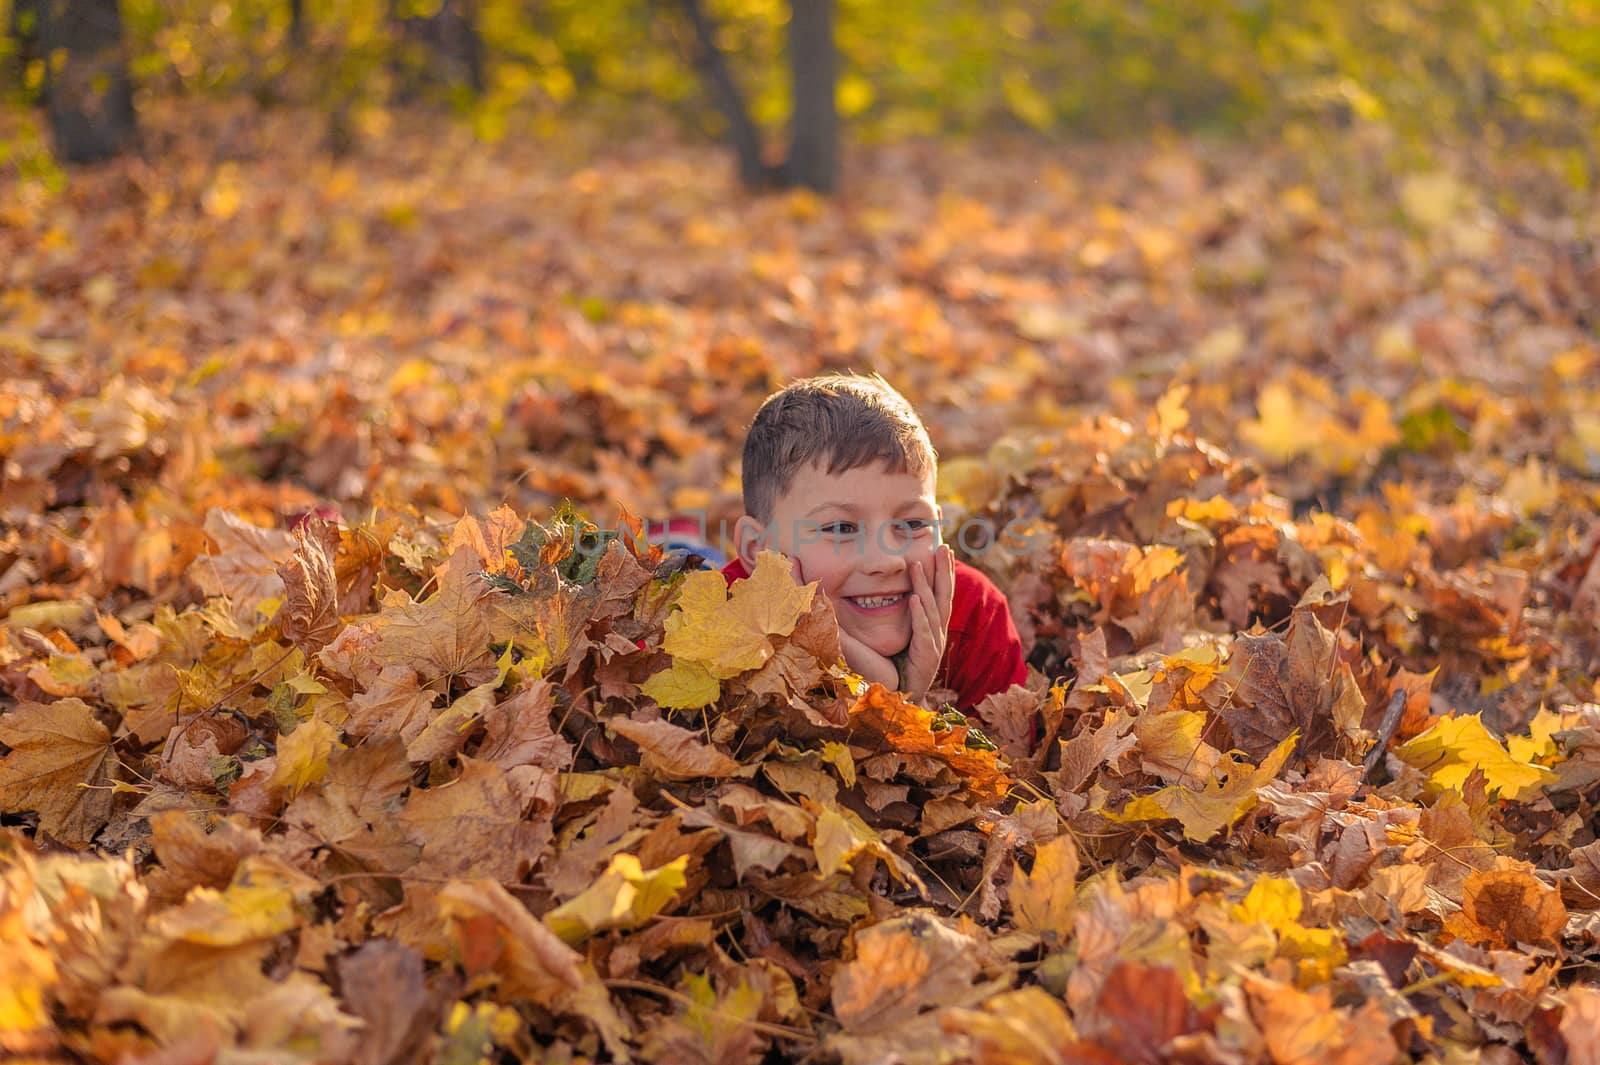 sly little boy hid in the yellow fallen foliage in the autumn park by chernobrovin